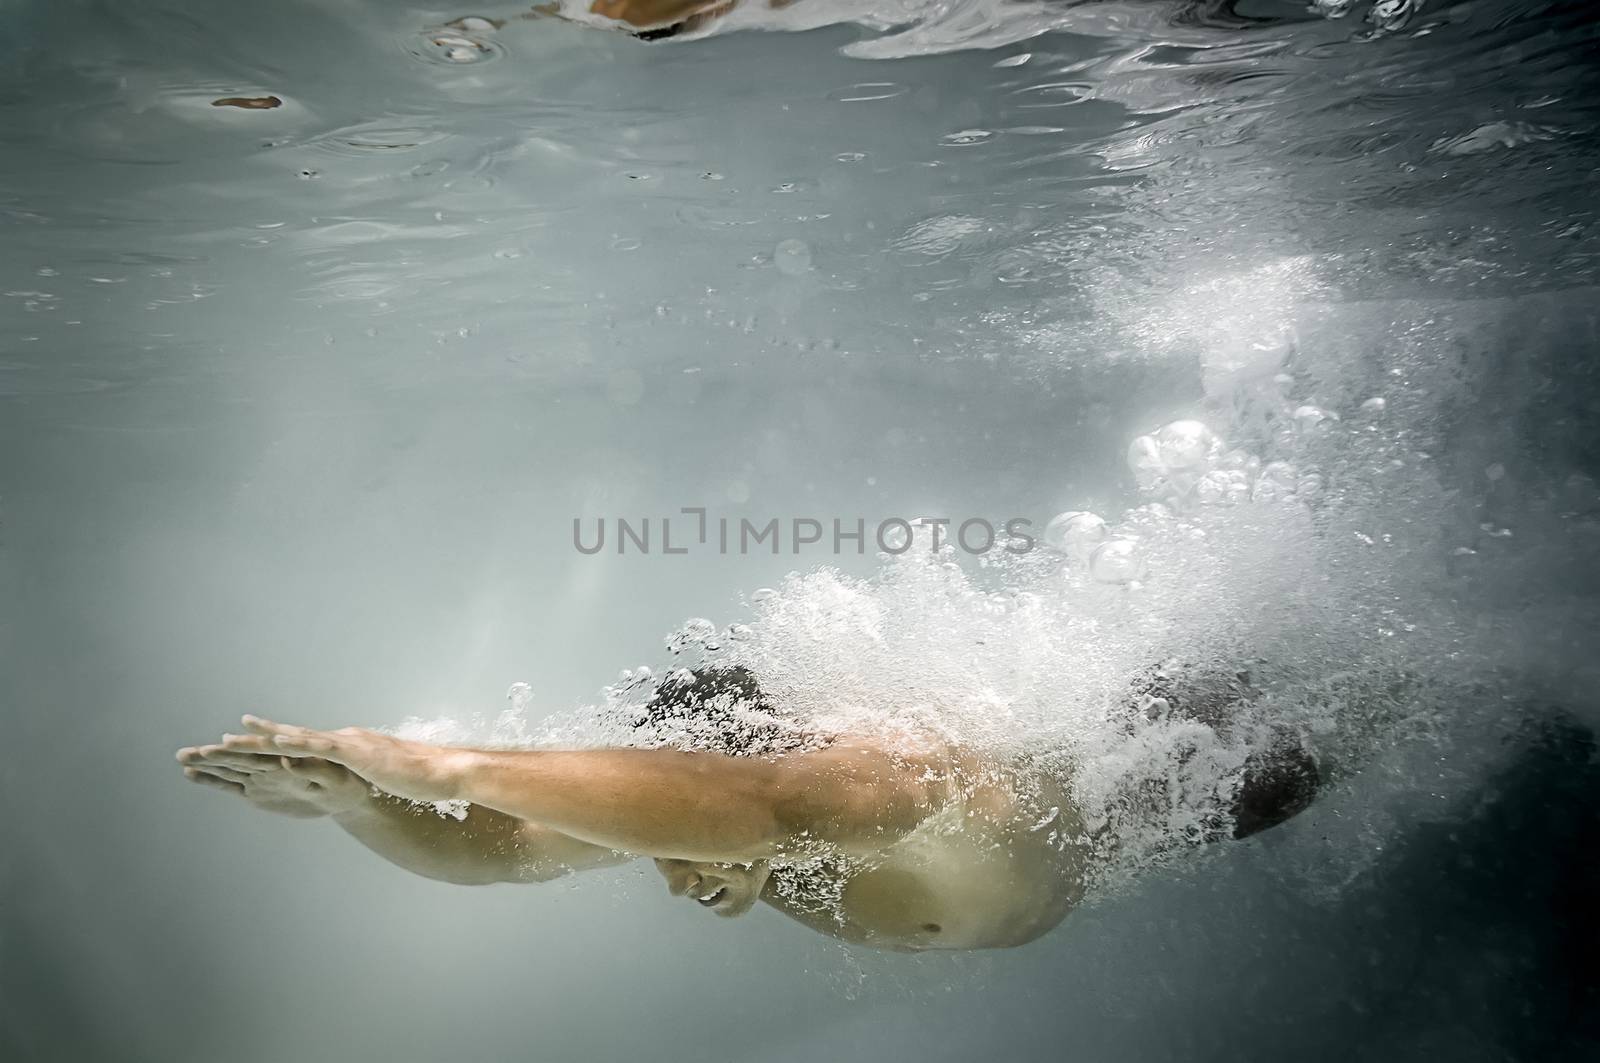 An image of a man diving in the pool with lots of air bubbles